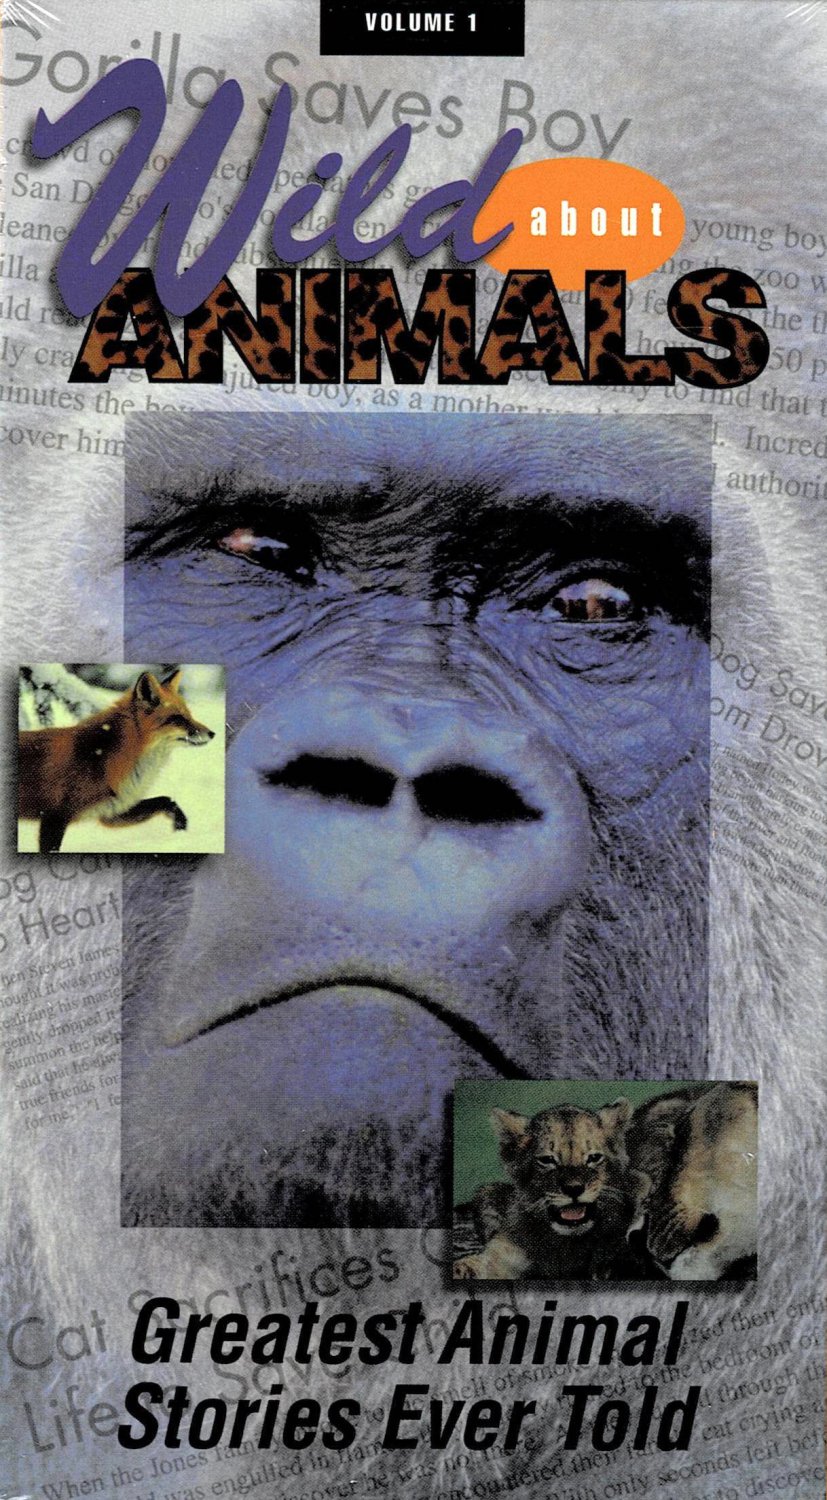 Wild About Animals Volume 1 Documentary Greatest Animal Stories Ever Told  VHS Video NEW